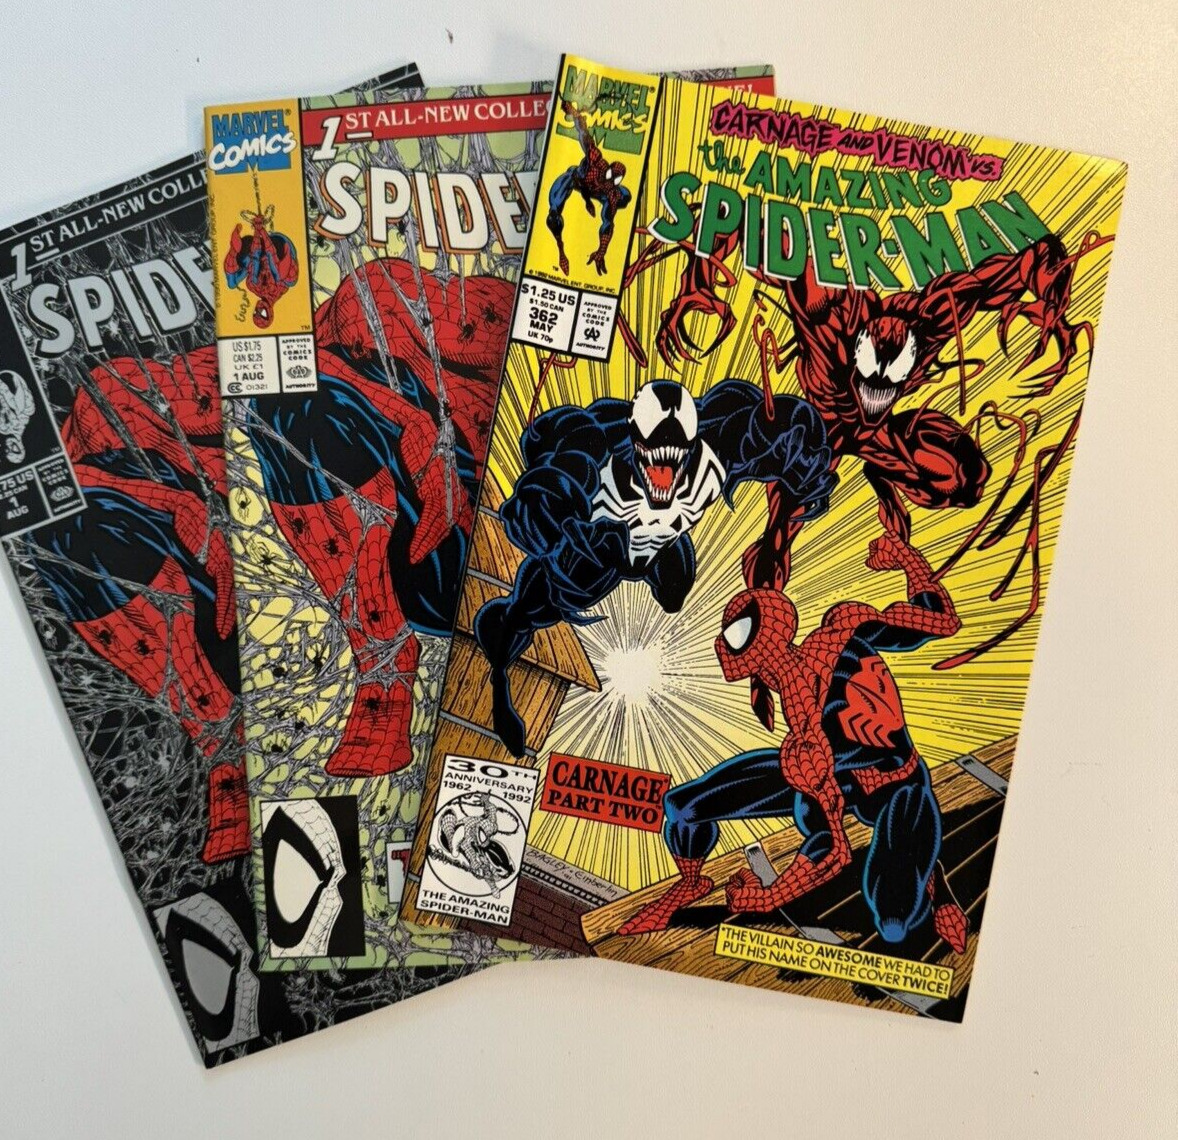 Amazing Spider-Man #362 and Spider-man Torment Silver And Green #1 - 3 comics